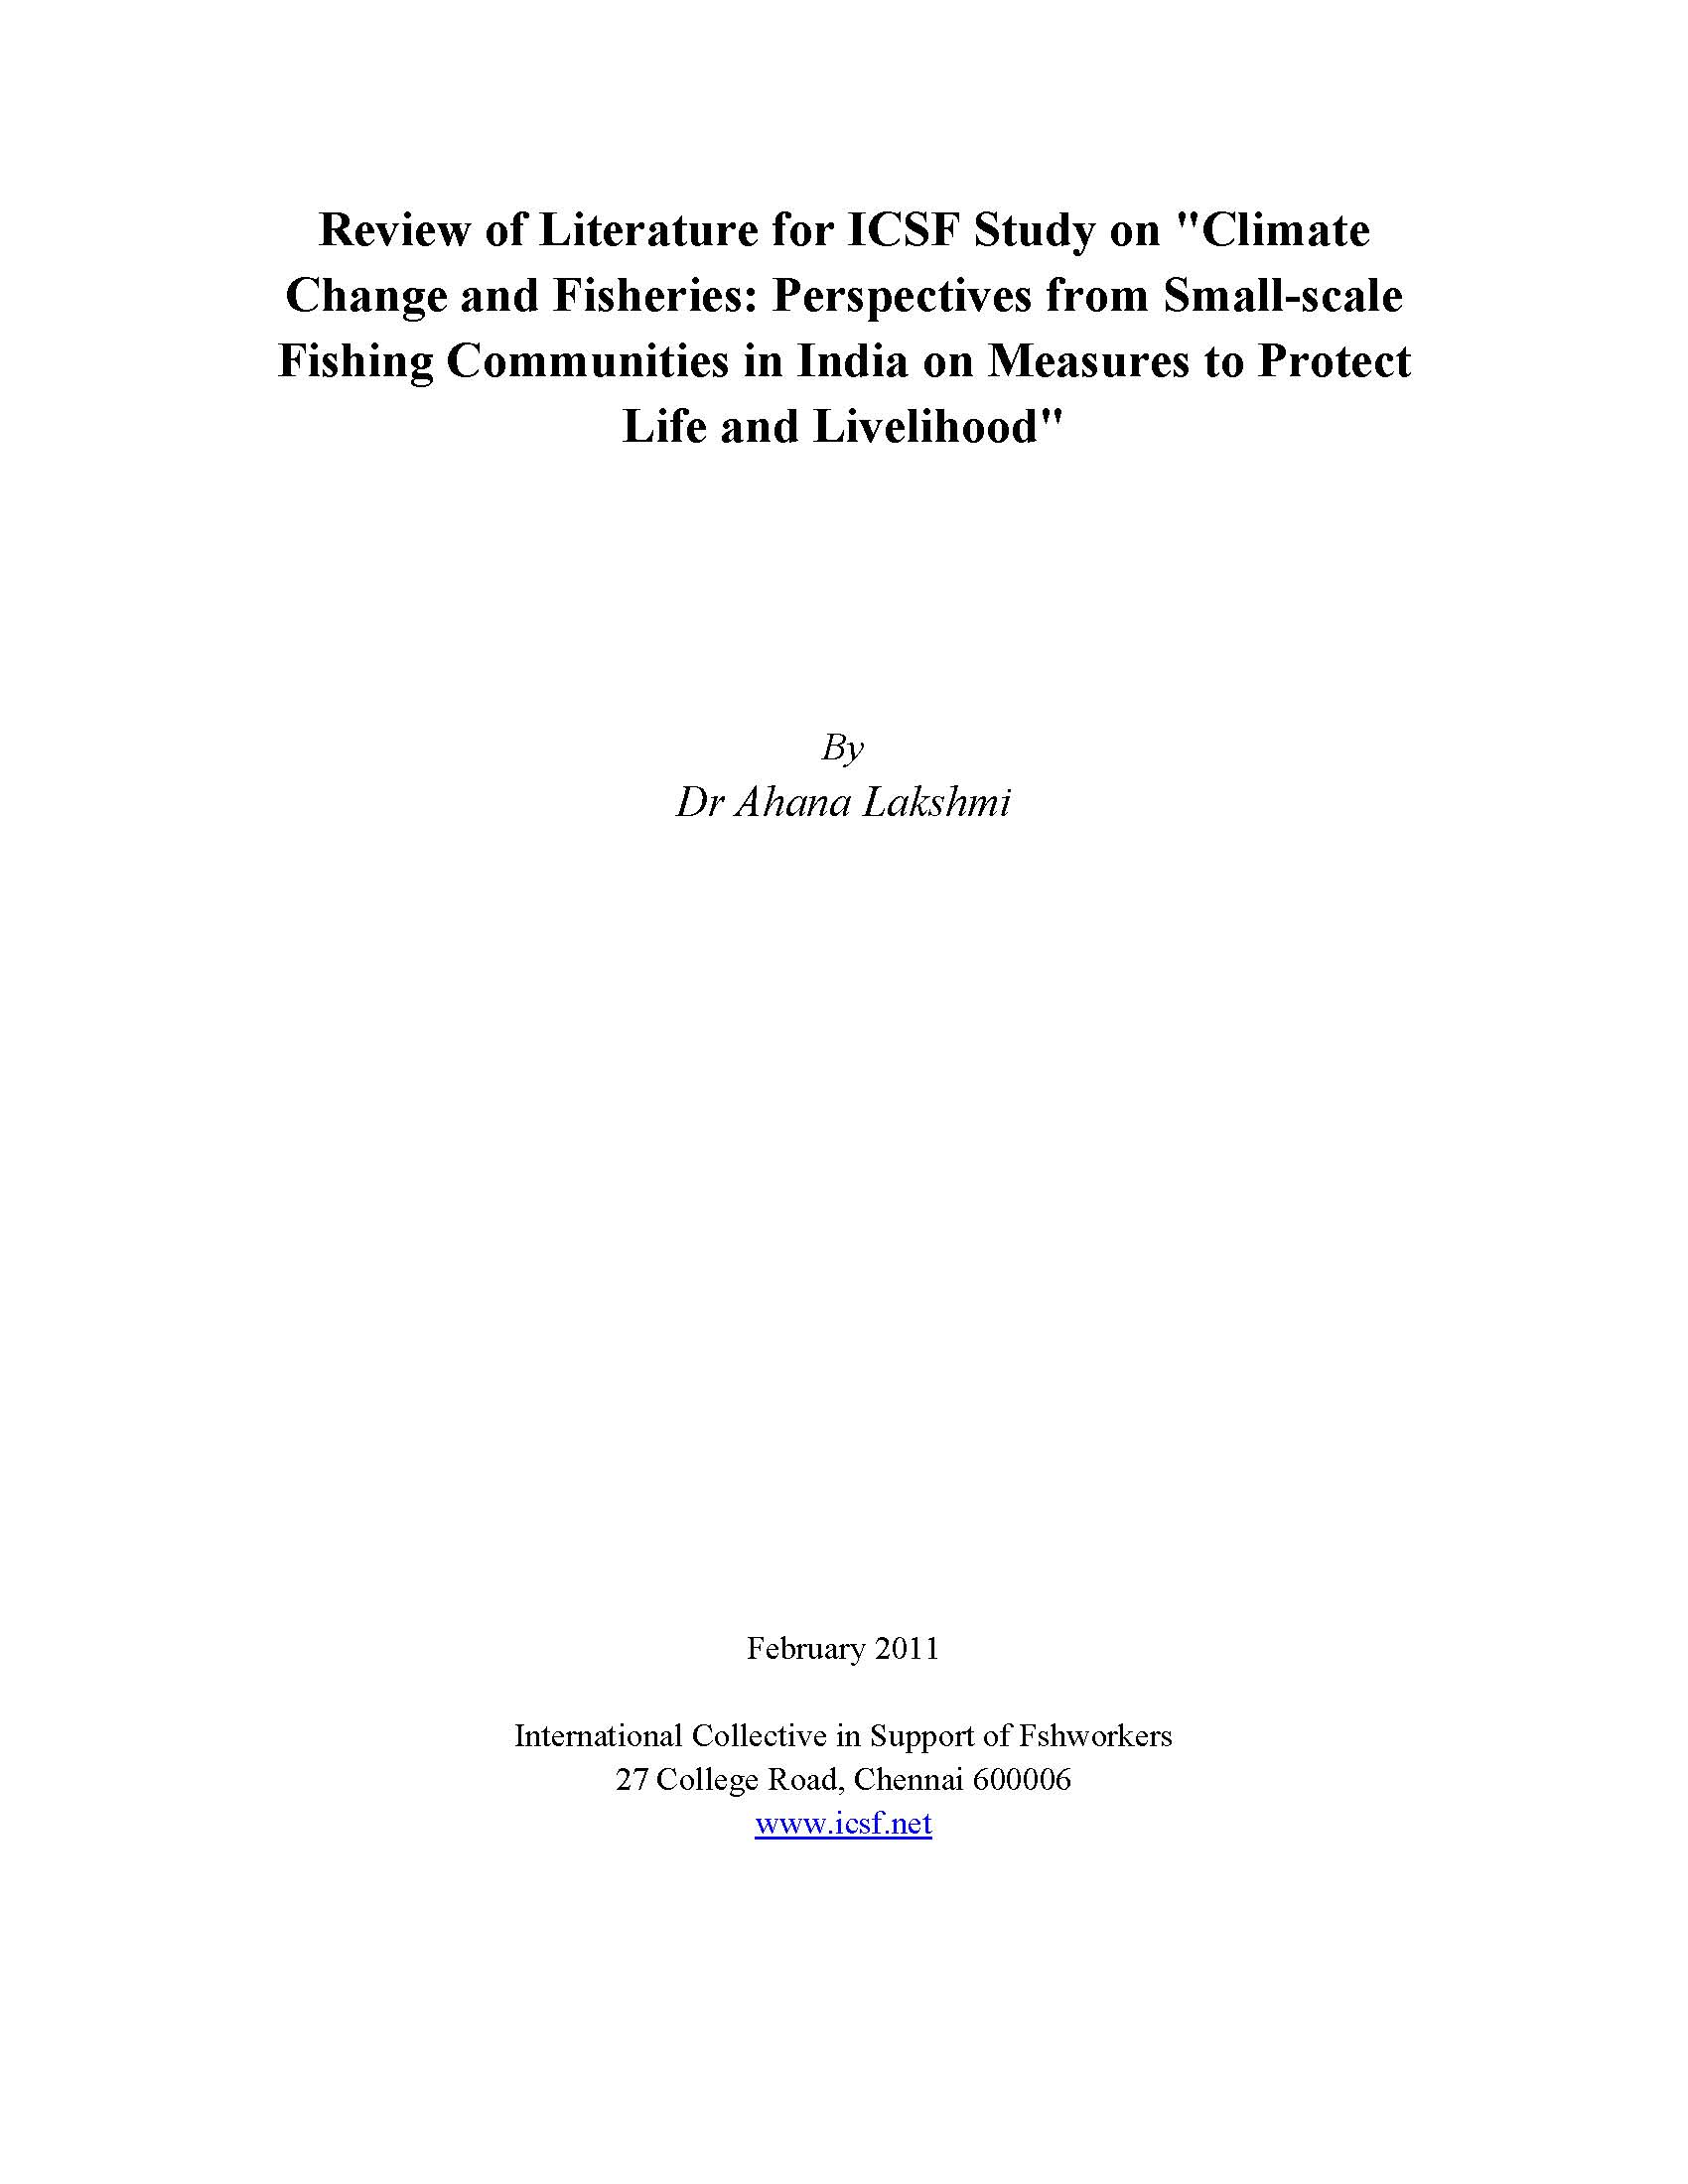 Review of Literature for ICSF Study on “Climate Change and Fisheries: Perspectives from Small-scale Fishing Communities in India on Measures to Protect Life and Livelihood”